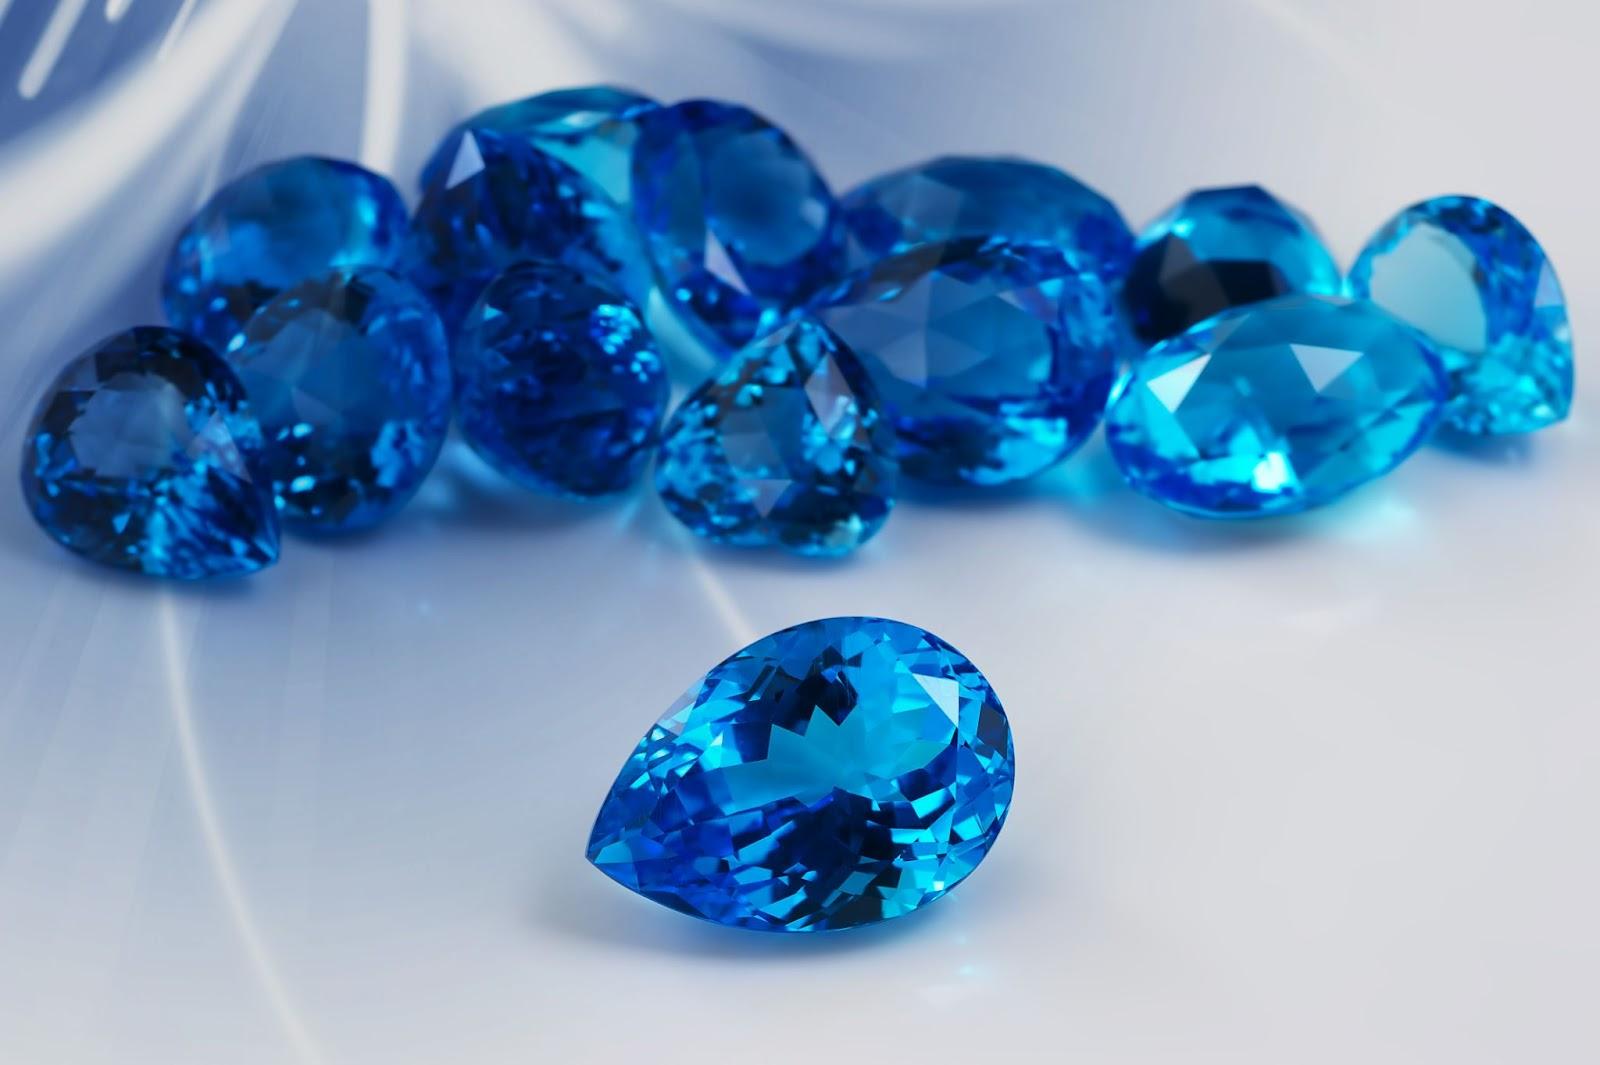 Different cuts of light blue topaz against a blue and gray gradient background